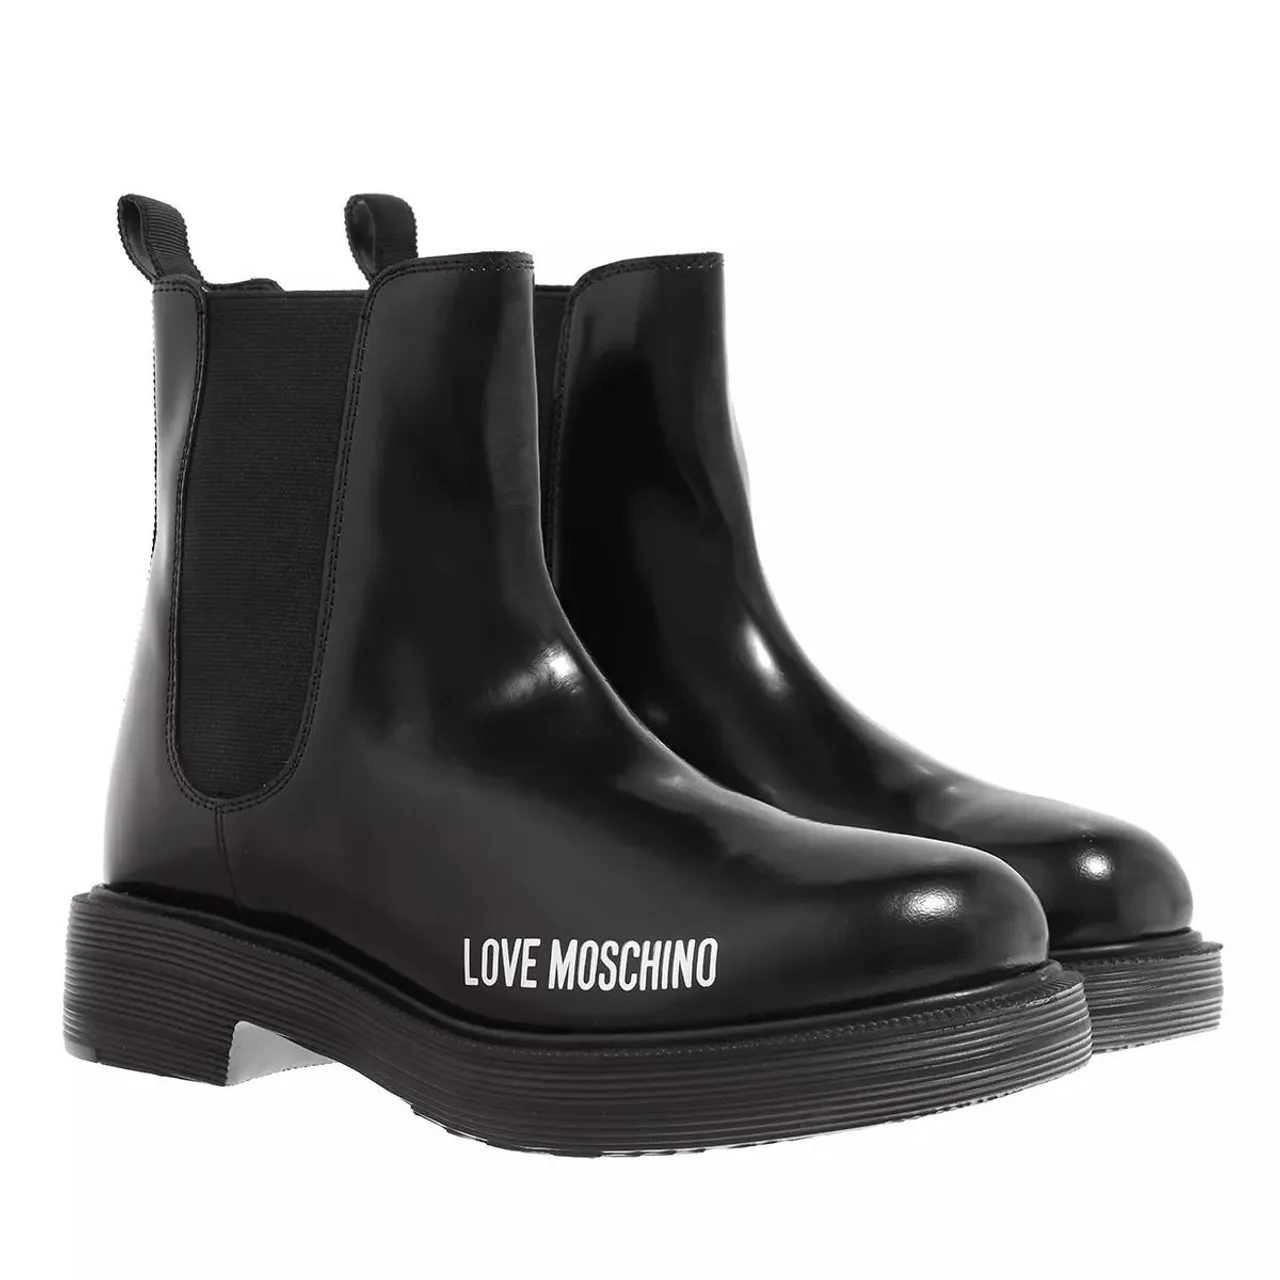 Love Moschino Boots & Ankle Boots - Sca.Nod.City40 Vit.Abrasivato - black - Boots & Ankle Boots for ladies